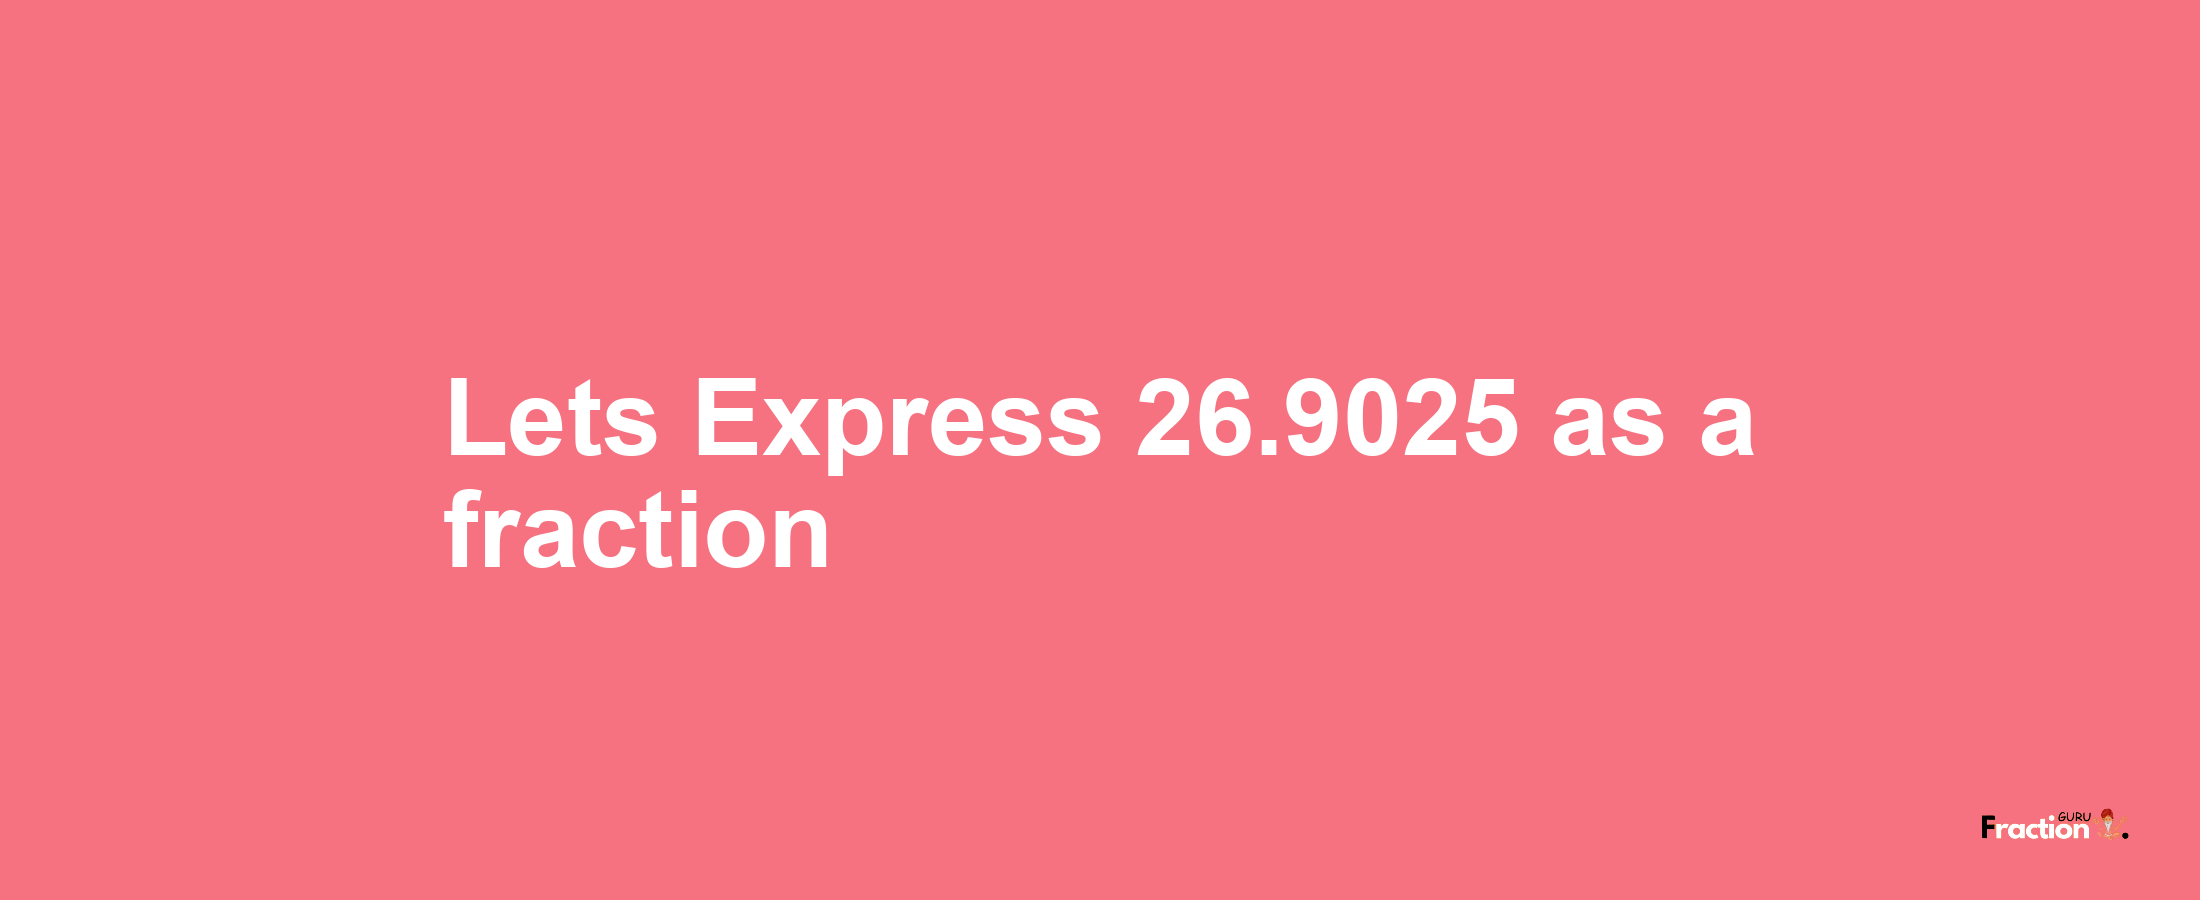 Lets Express 26.9025 as afraction